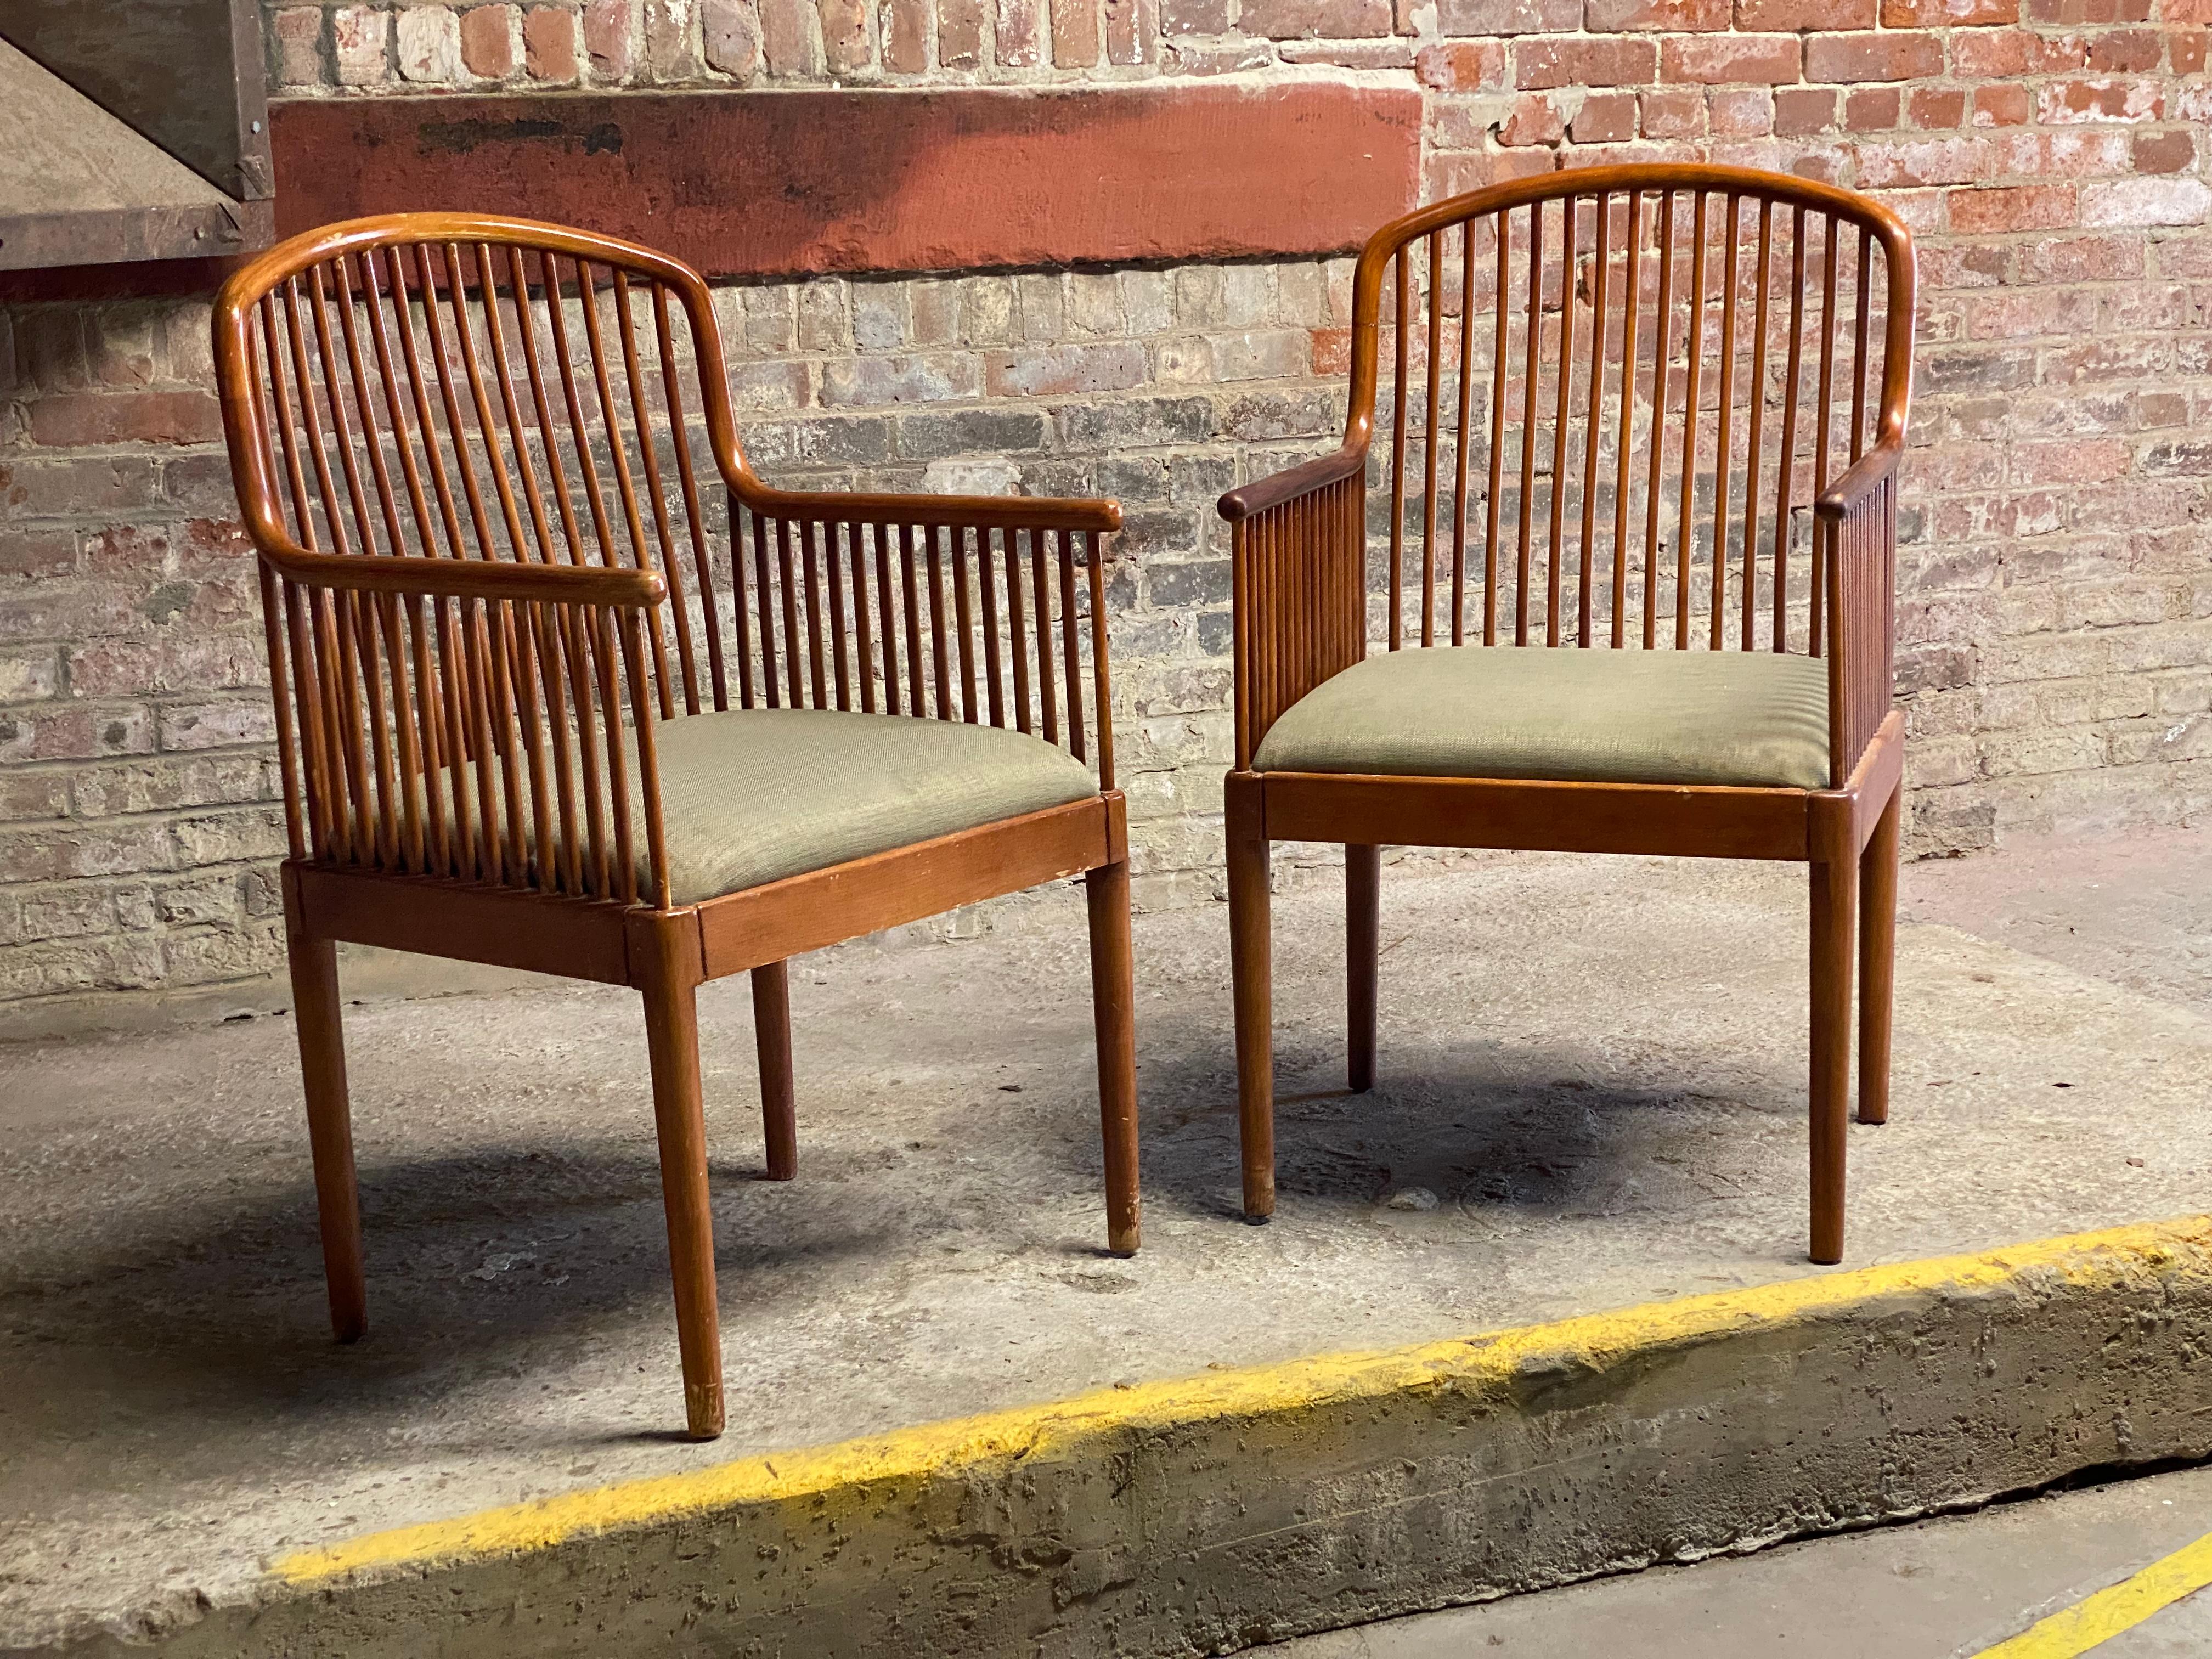 Pair of Davis Allen for Knoll 1983 spindle back armchairs. The Exeter chair embodies design principle of the Austrian Secessionists, American Arts and Crafts and The Bauhaus movement. Fine Post Modern design. Both example are signed with metal tags